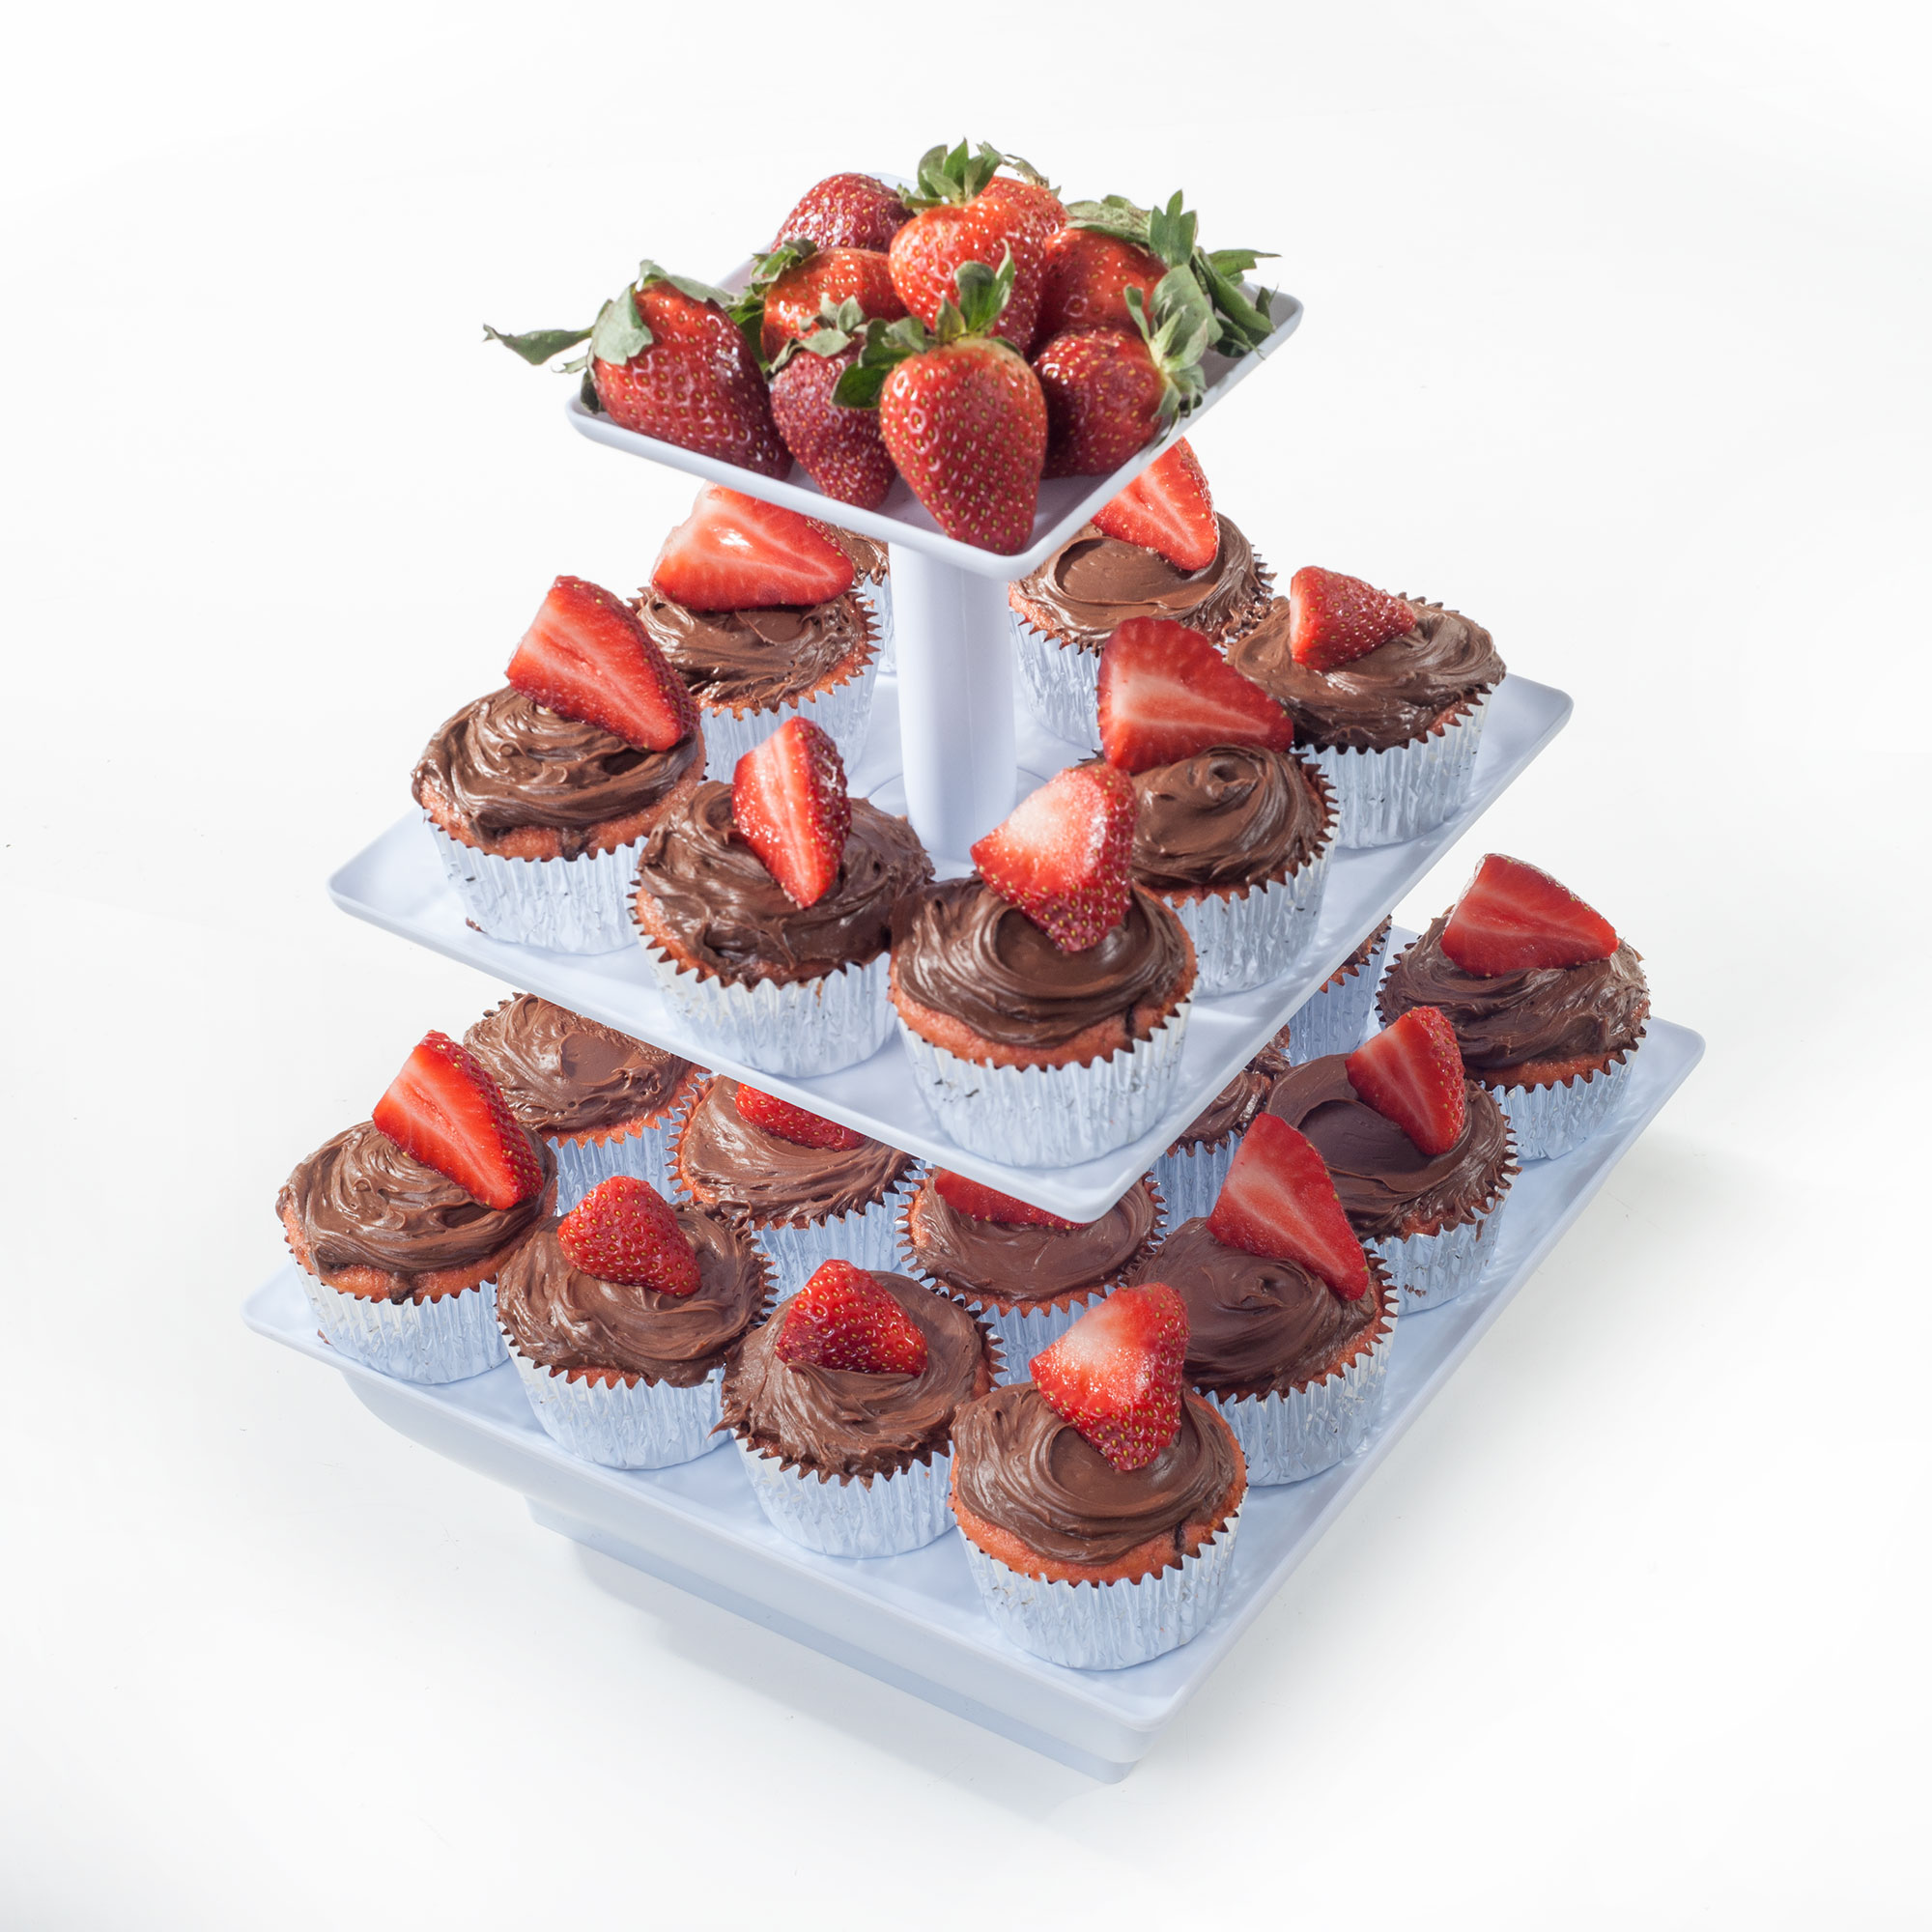 Chef Buddy 8 in x 8 in Plastic 3-Tier Birthday Tiered Dessert Stand, White - image 5 of 8